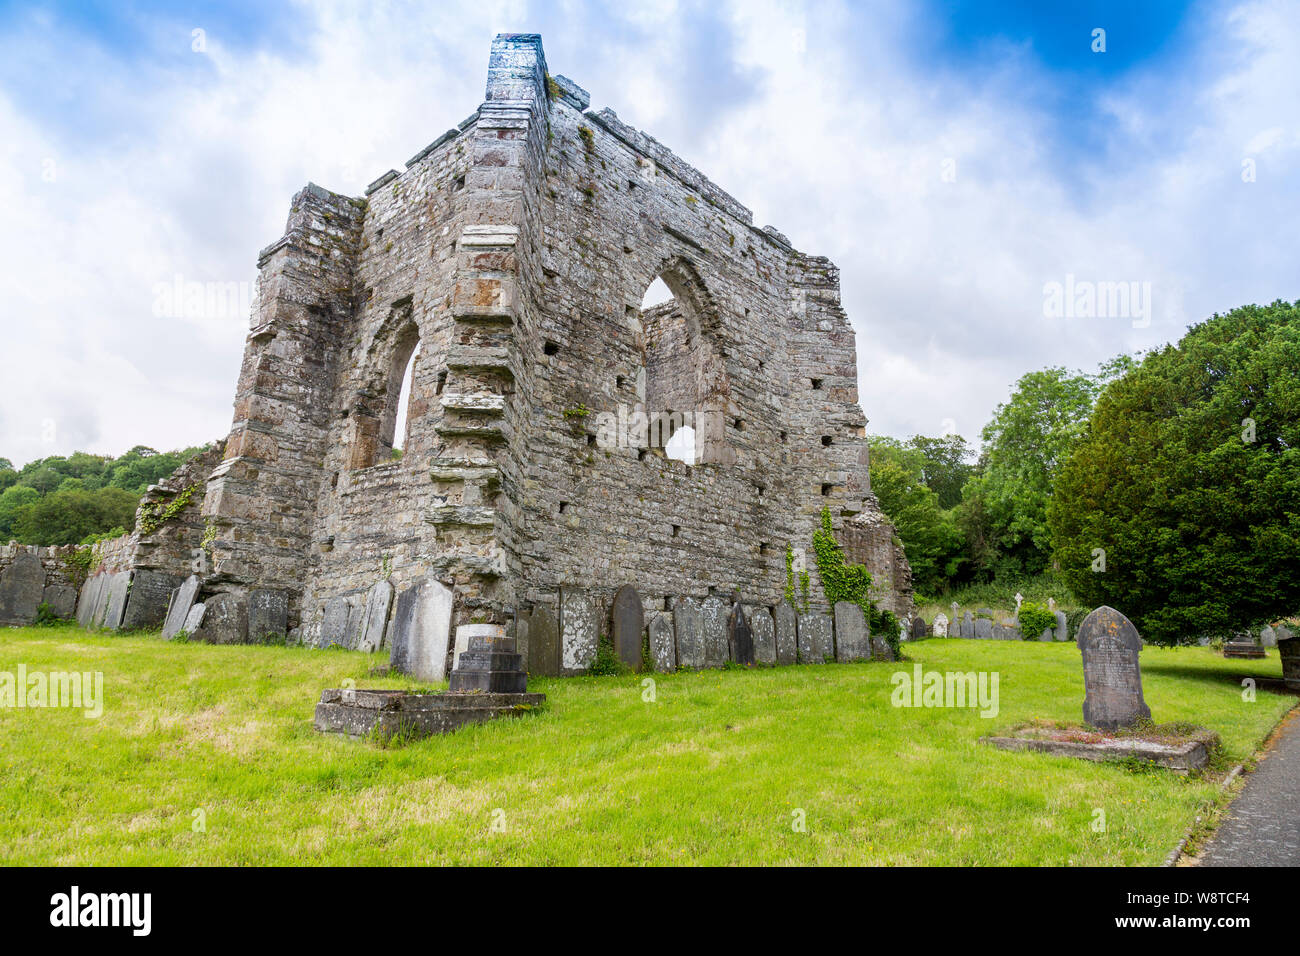 The ruins of the 12th century St Dogmaels Abbey, near Cardigan, Pembrokeshire, Wales, UK Stock Photo